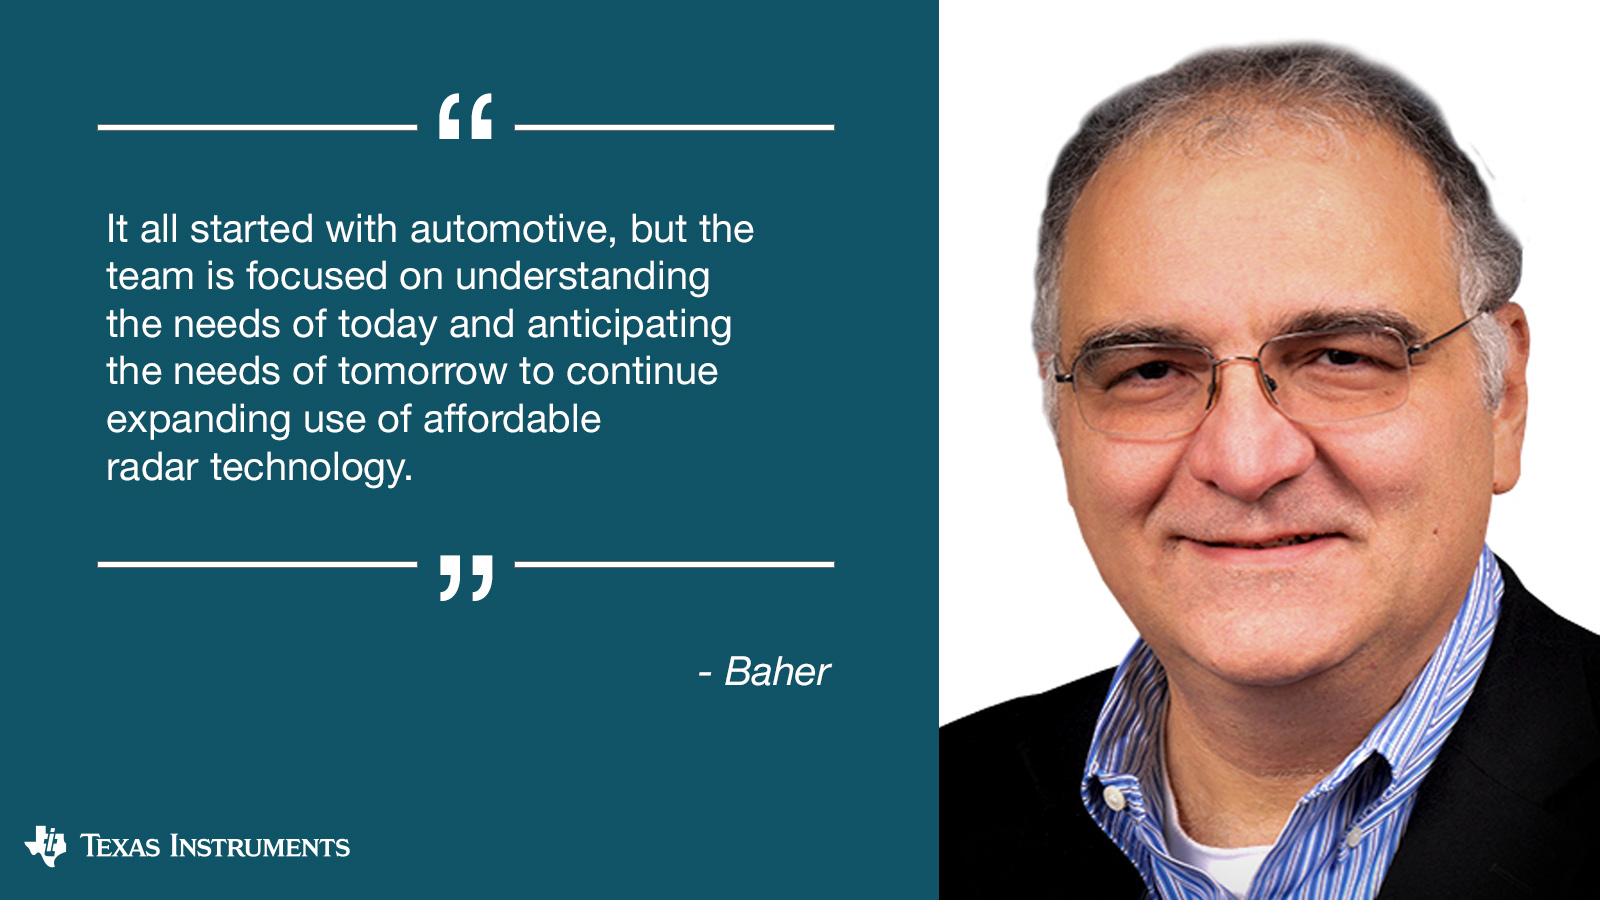 Image of Baher with a quote